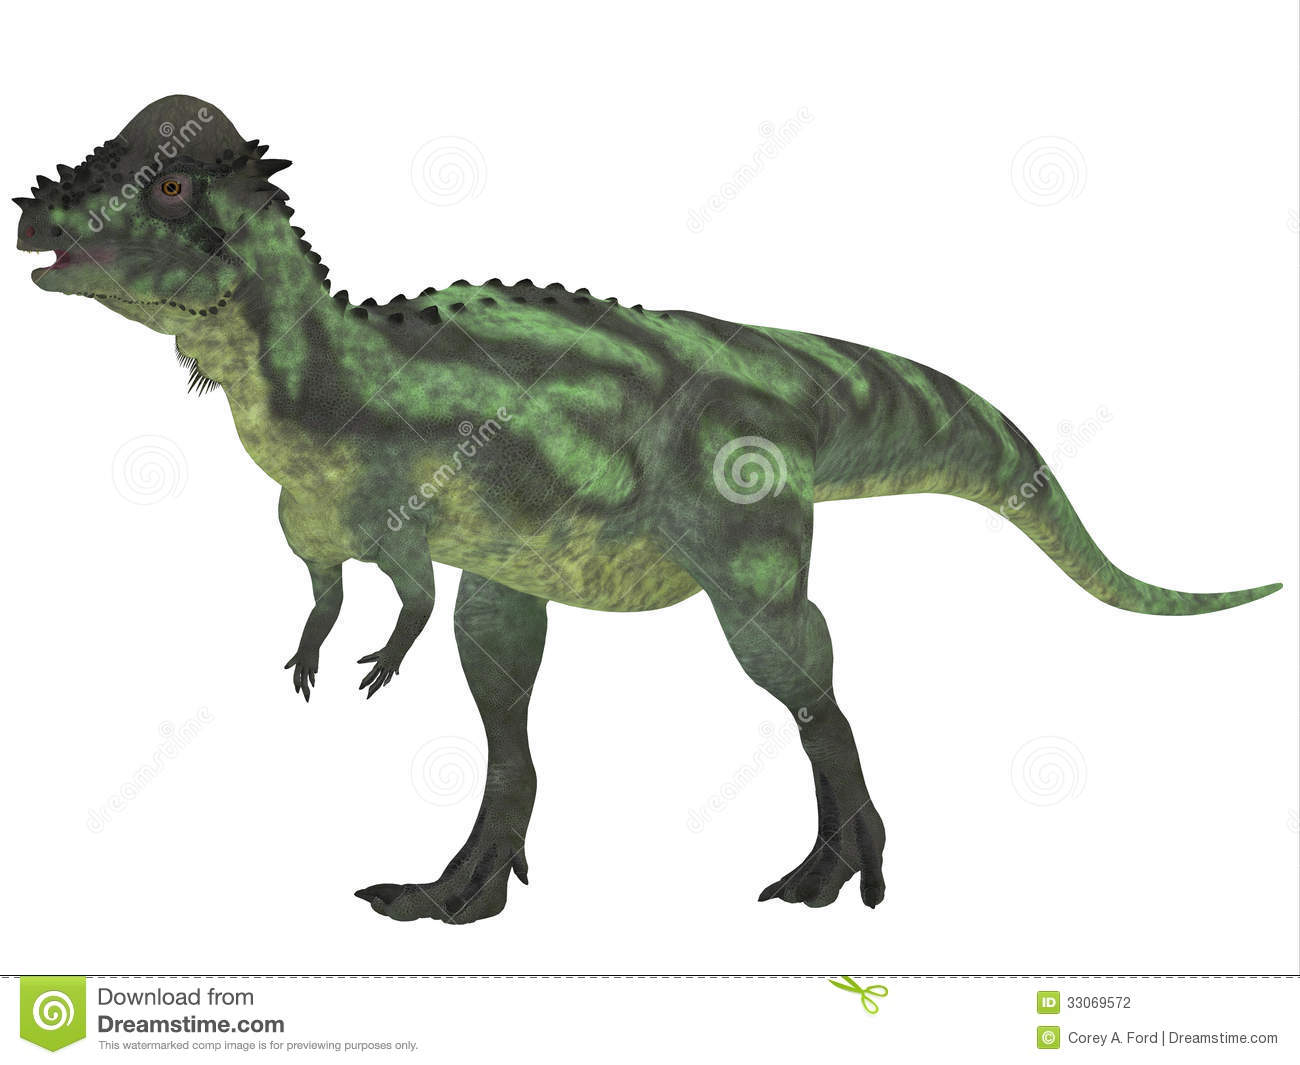 Pachycephalosaurus Dinosaur Was A Bipedal Omnivore With An Extremely